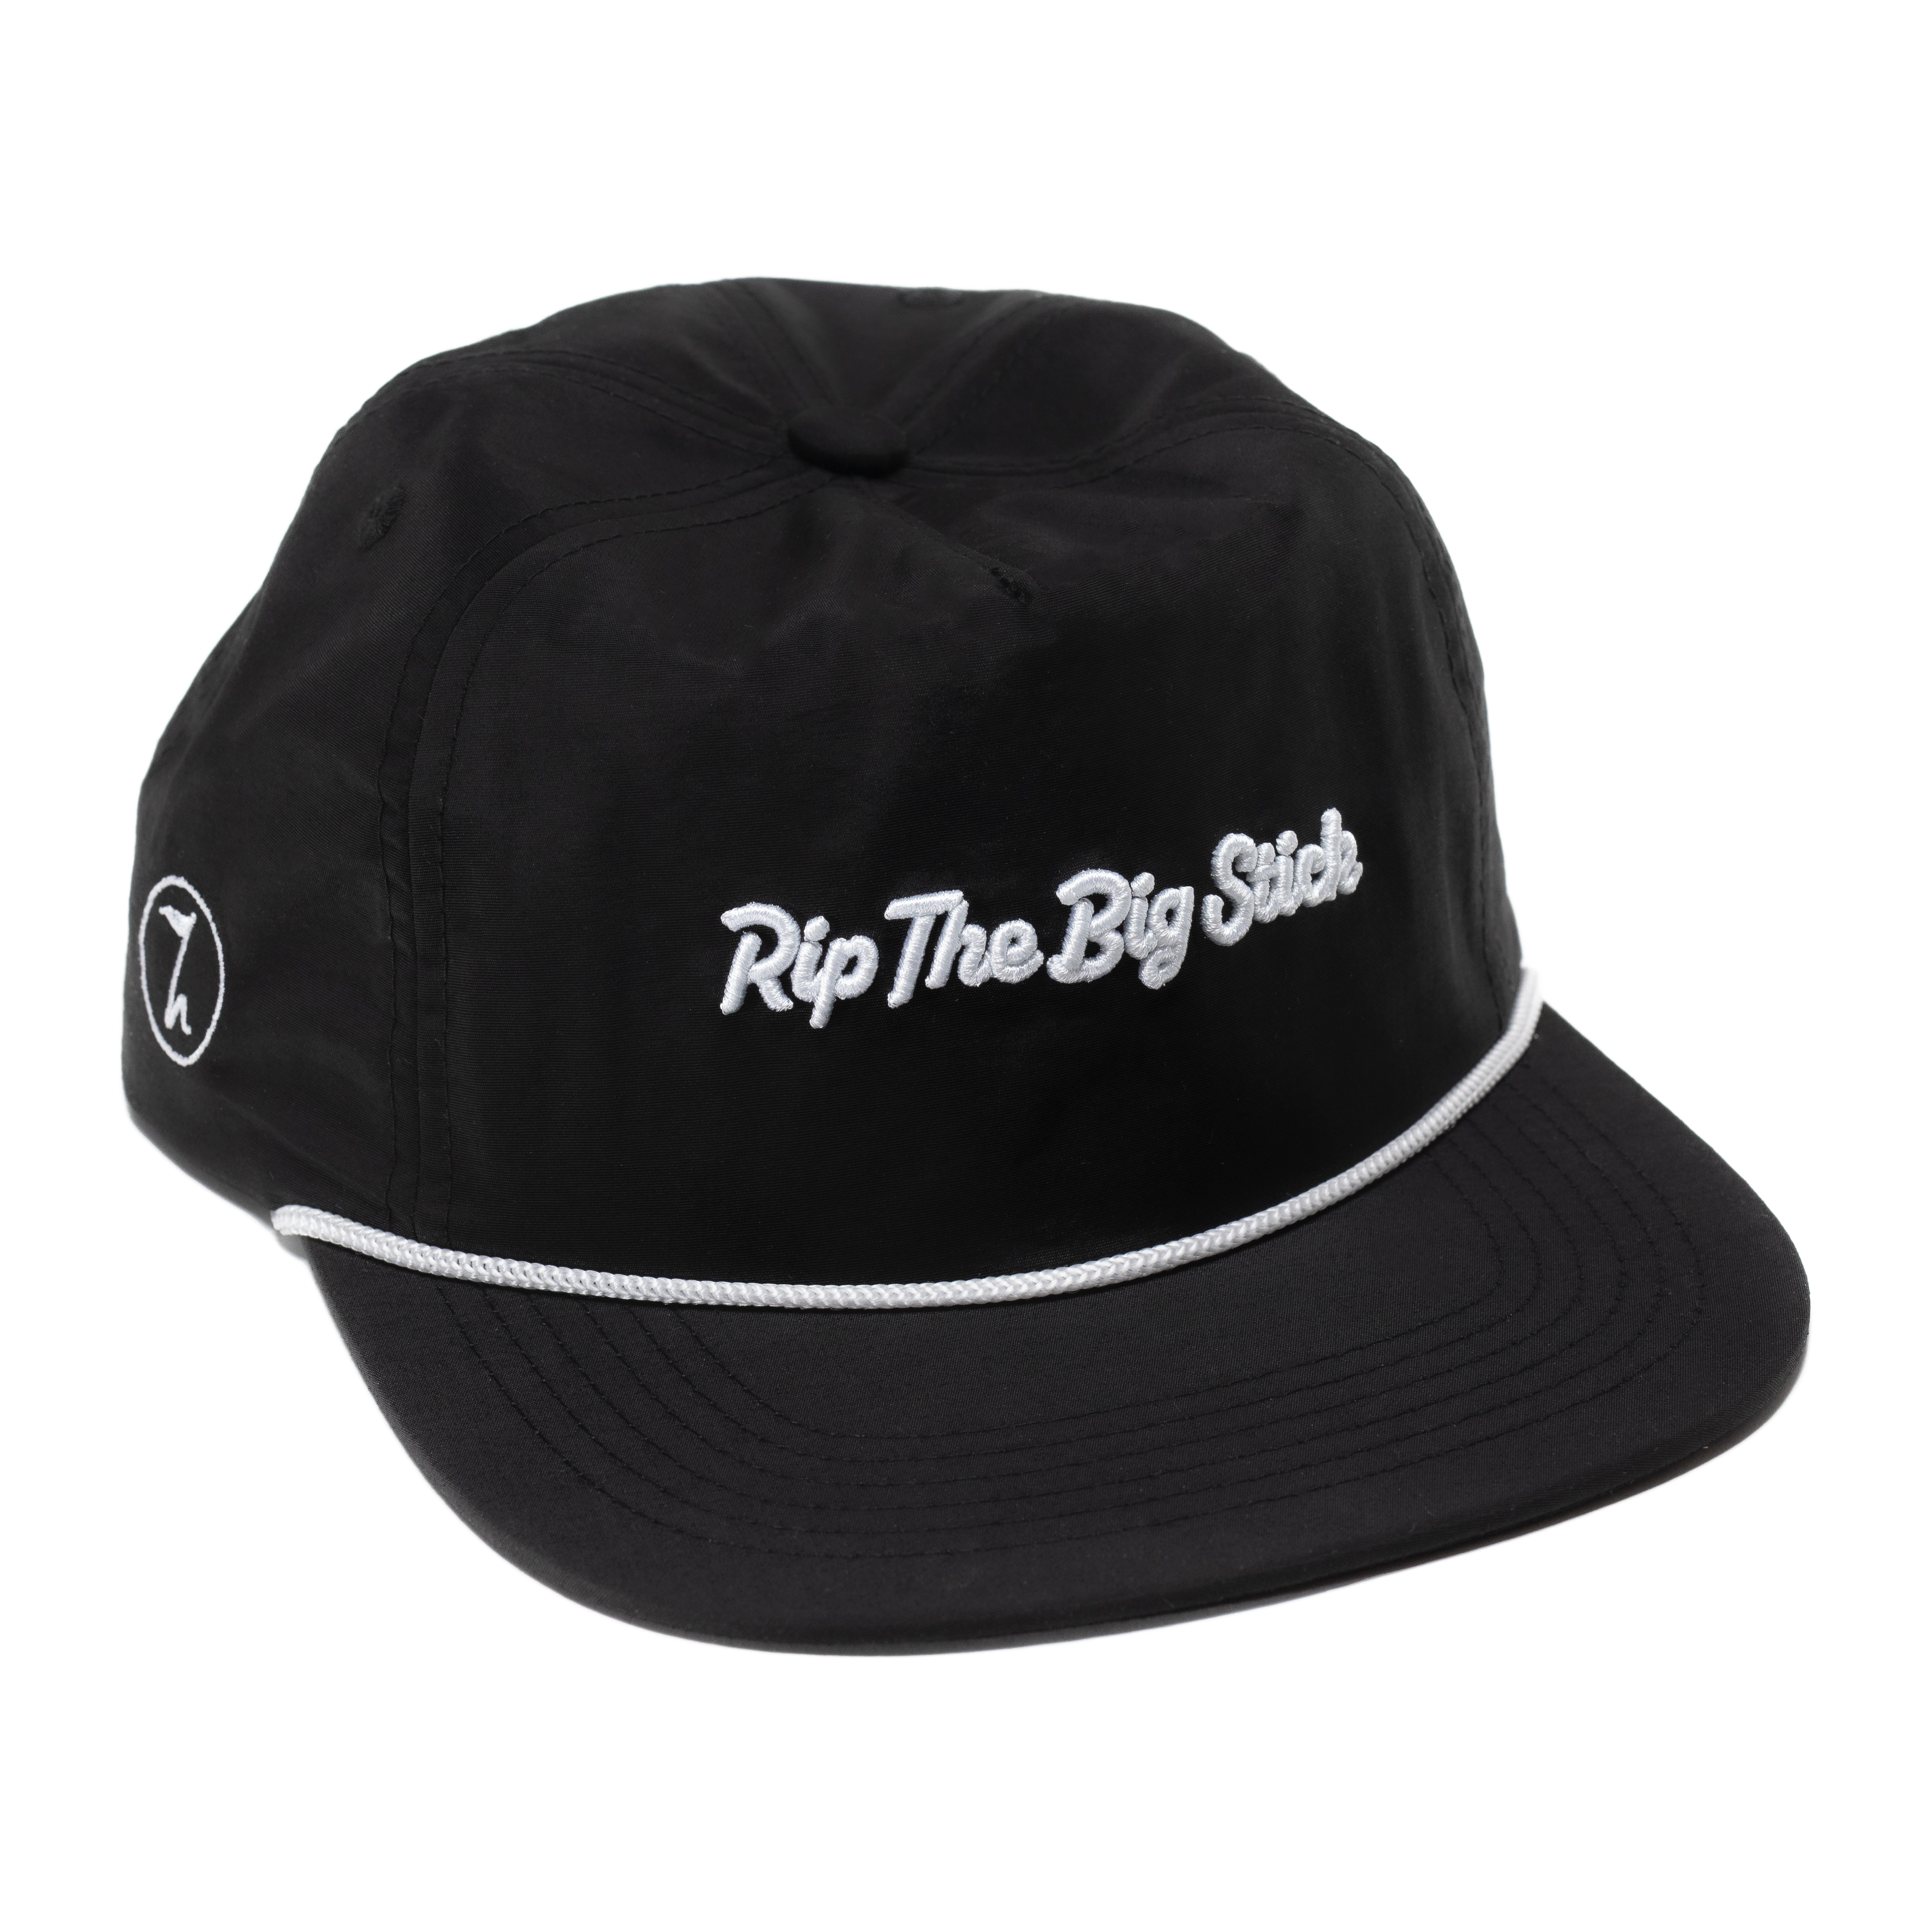 Hickory Apparel 'Rip The Big Stick' Rope Hat Black/White